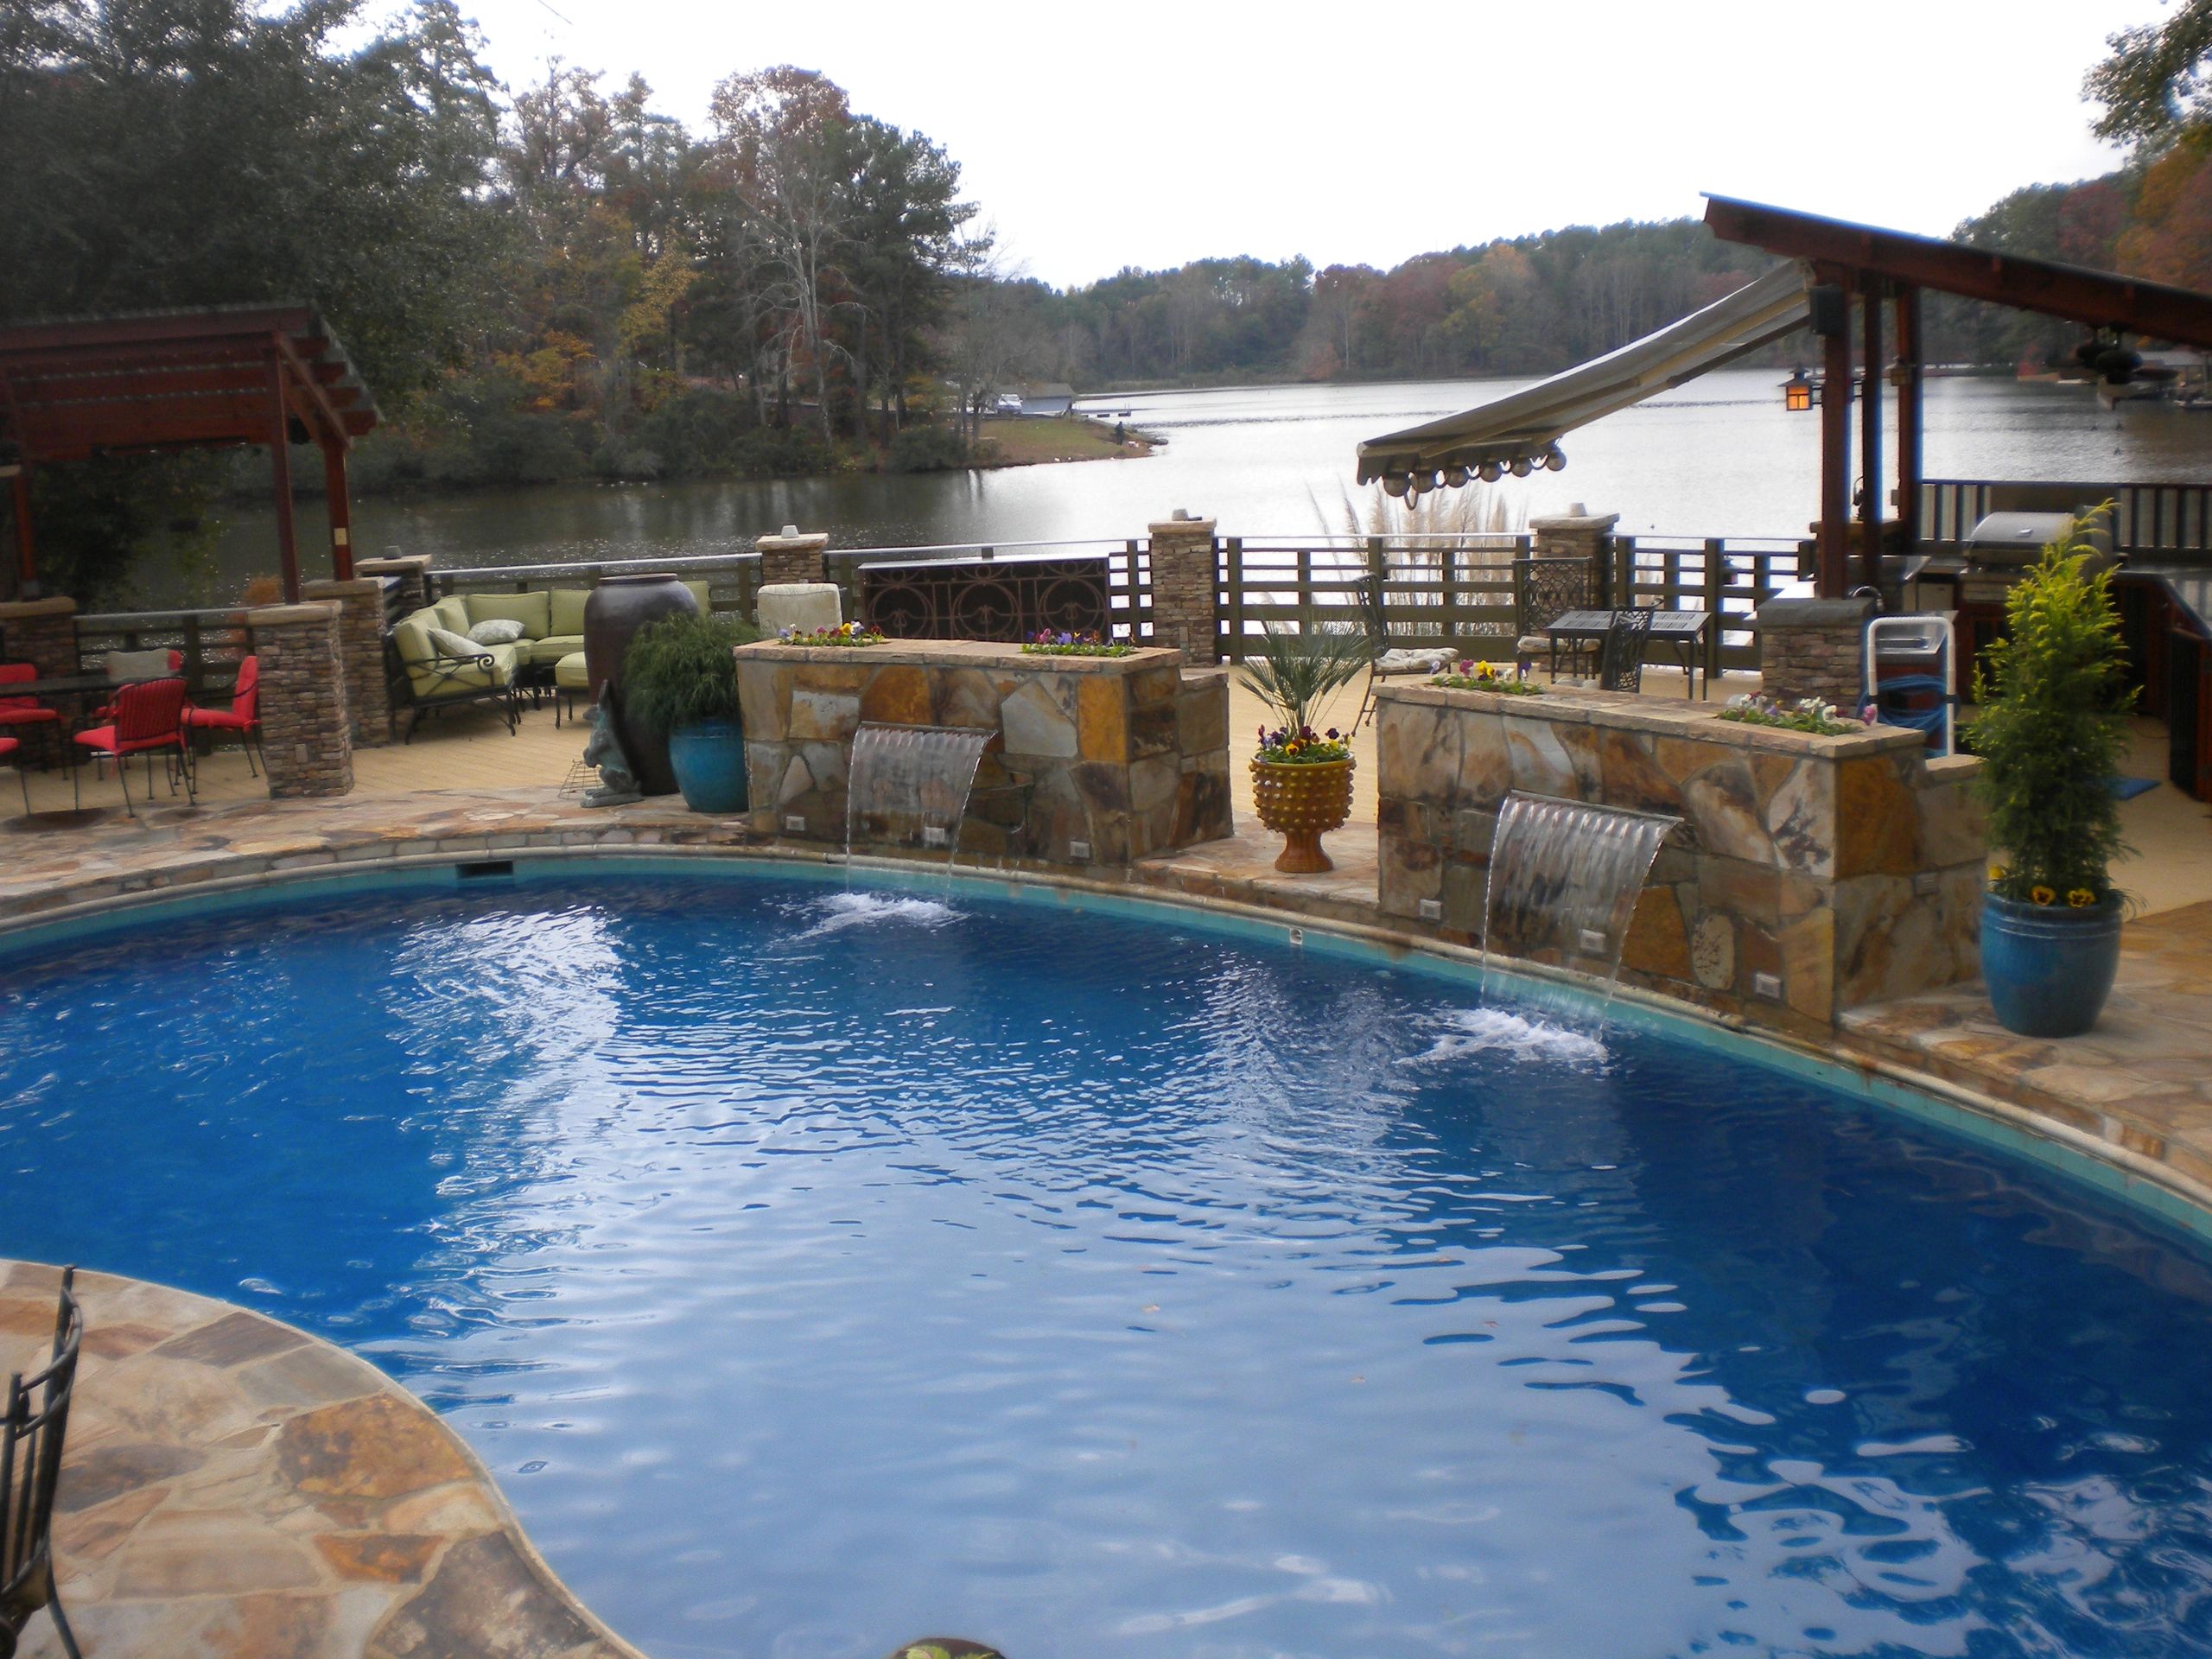 Southern Luxury Pools